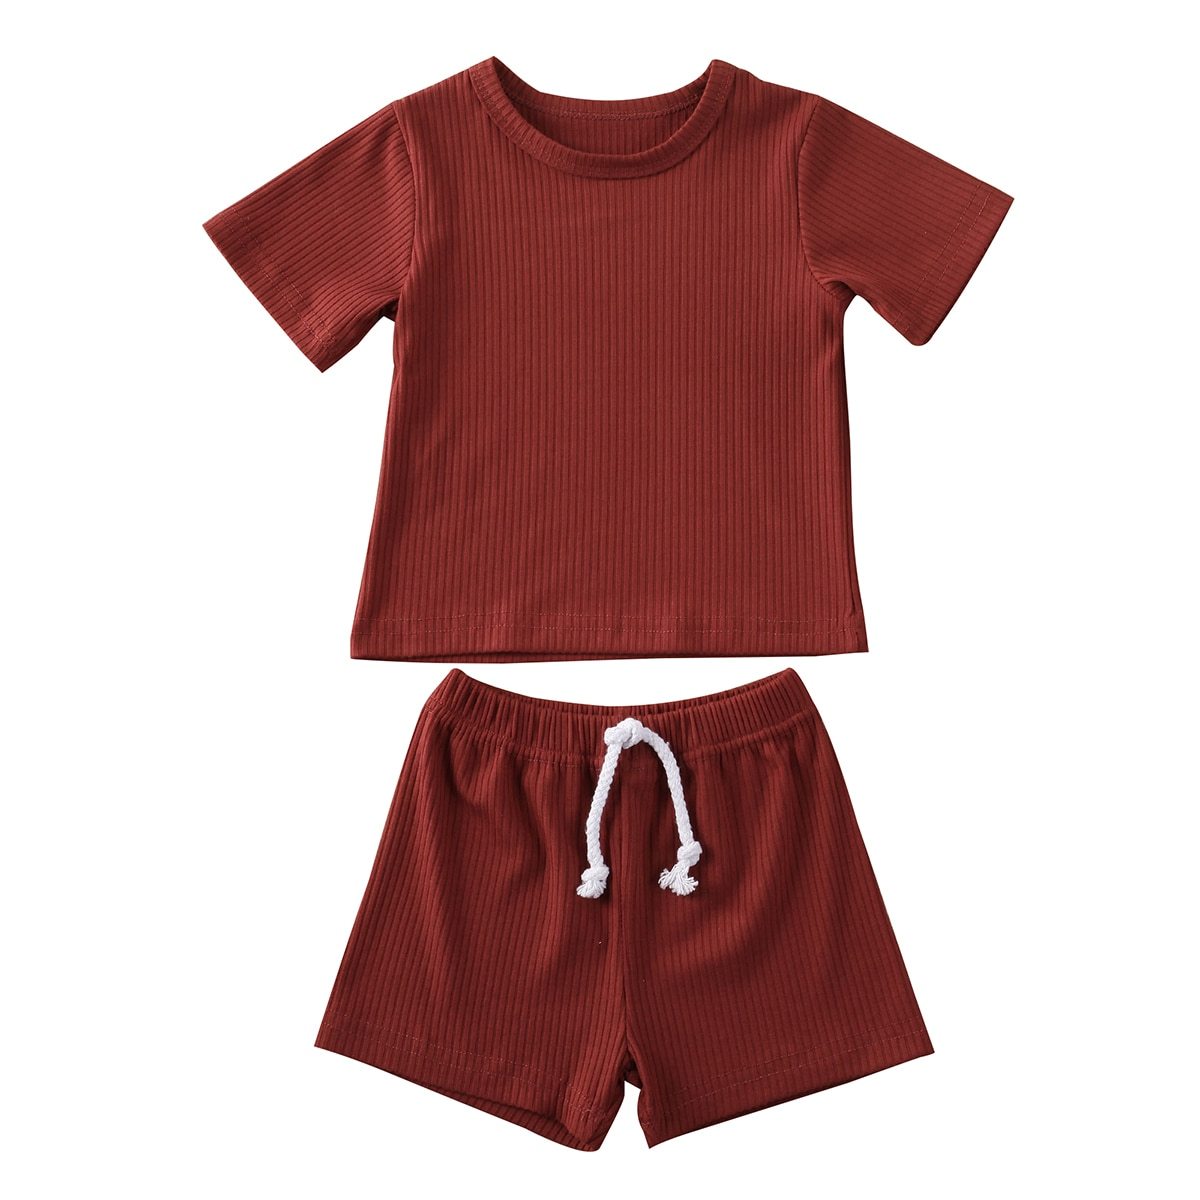 Harlow Summer Outfit Set